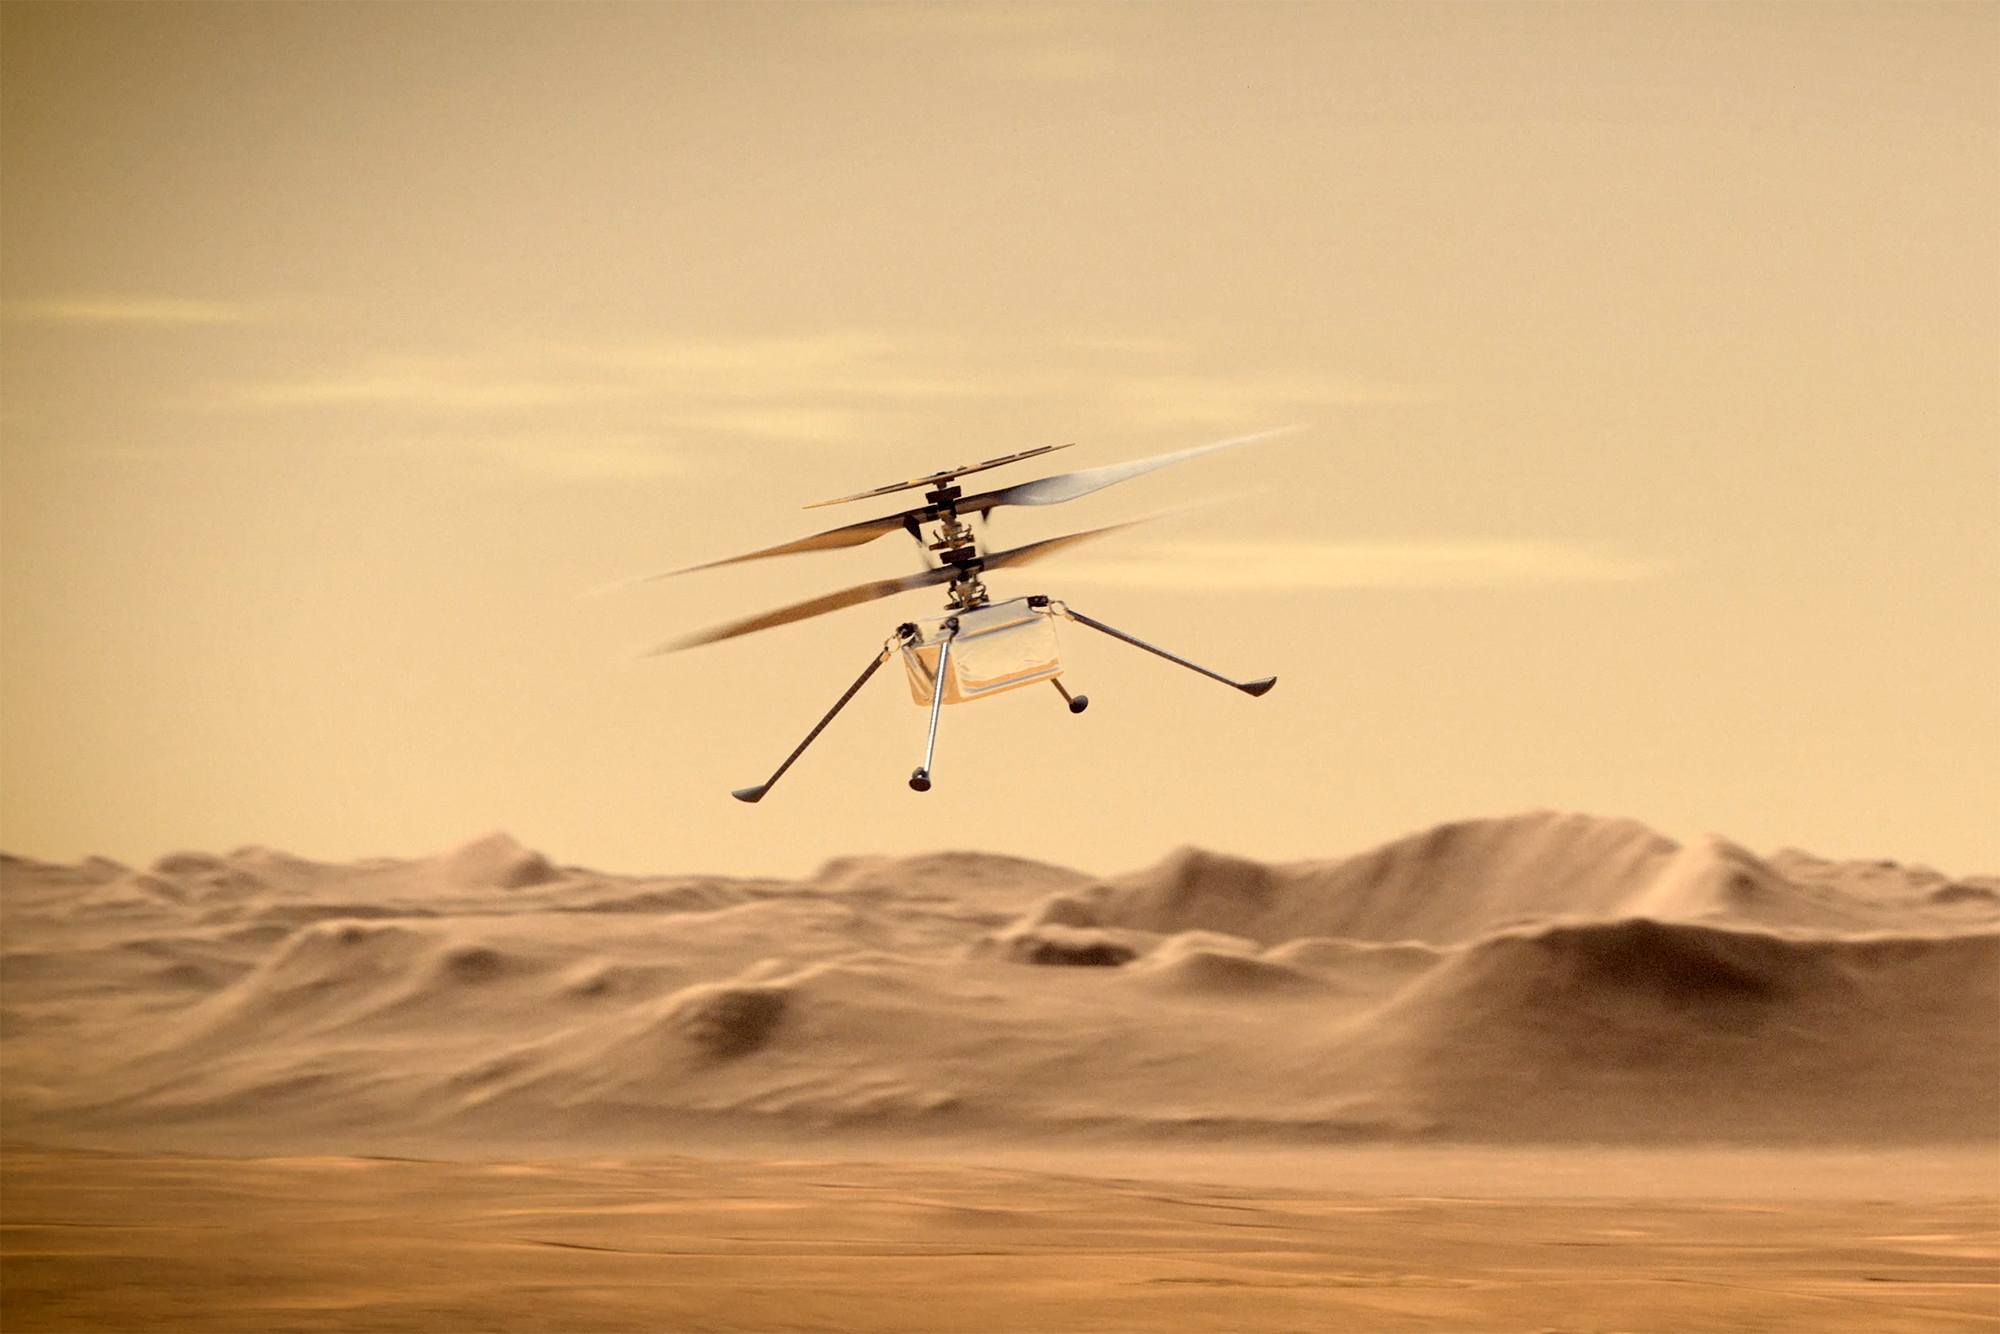 NASA’s Mars helicopter has just set a new flight
record